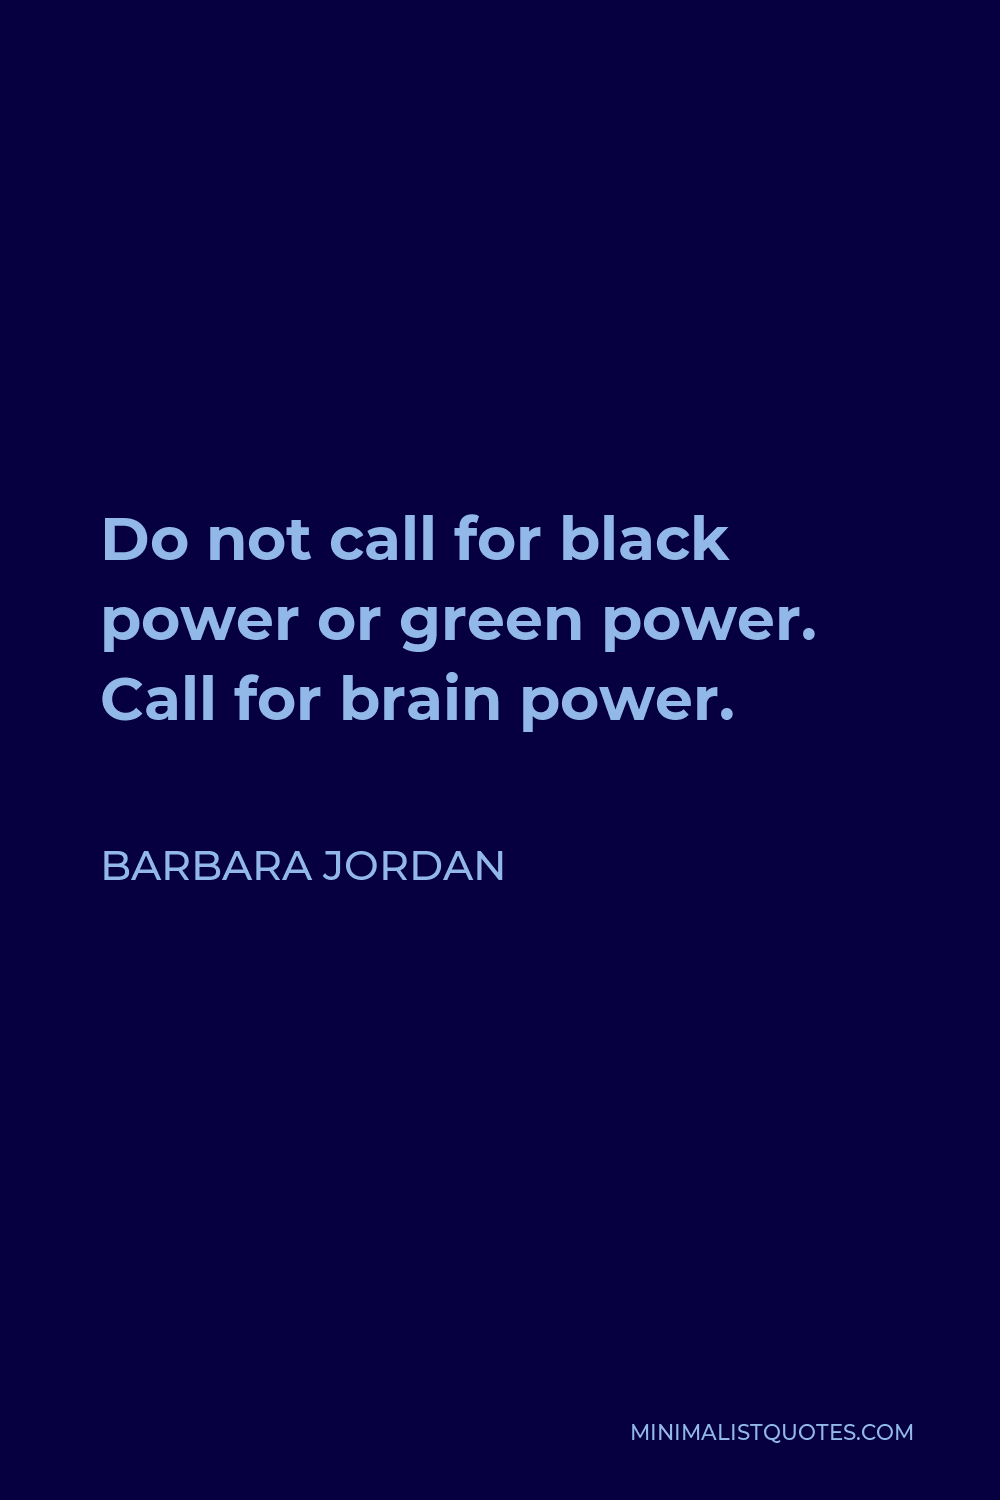 Barbara Jordan Quote - Do not call for black power or green power. Call for brain power.